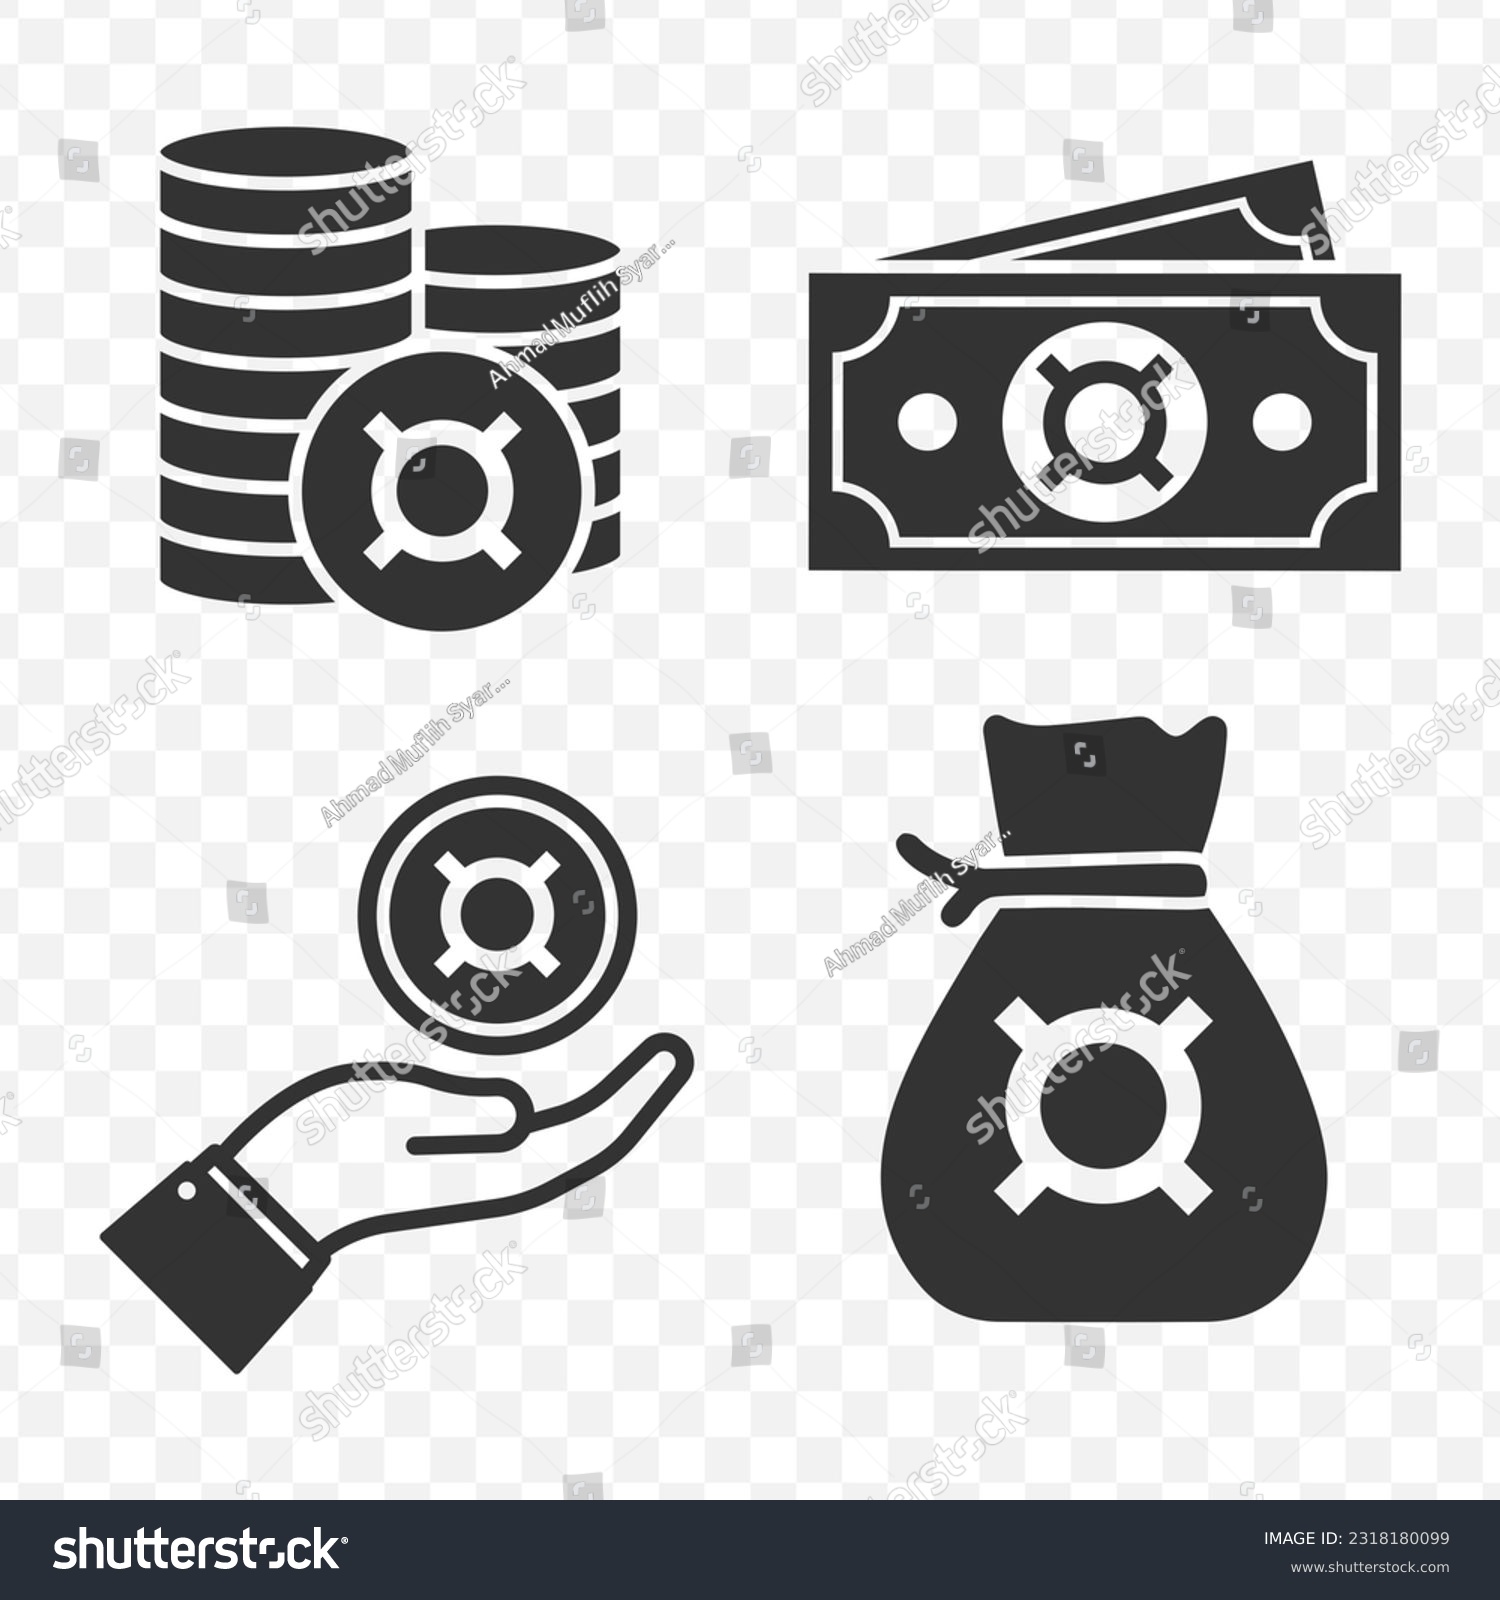 SVG of any currency symbol icons set money icon vector image on transparent background (PNG). svg